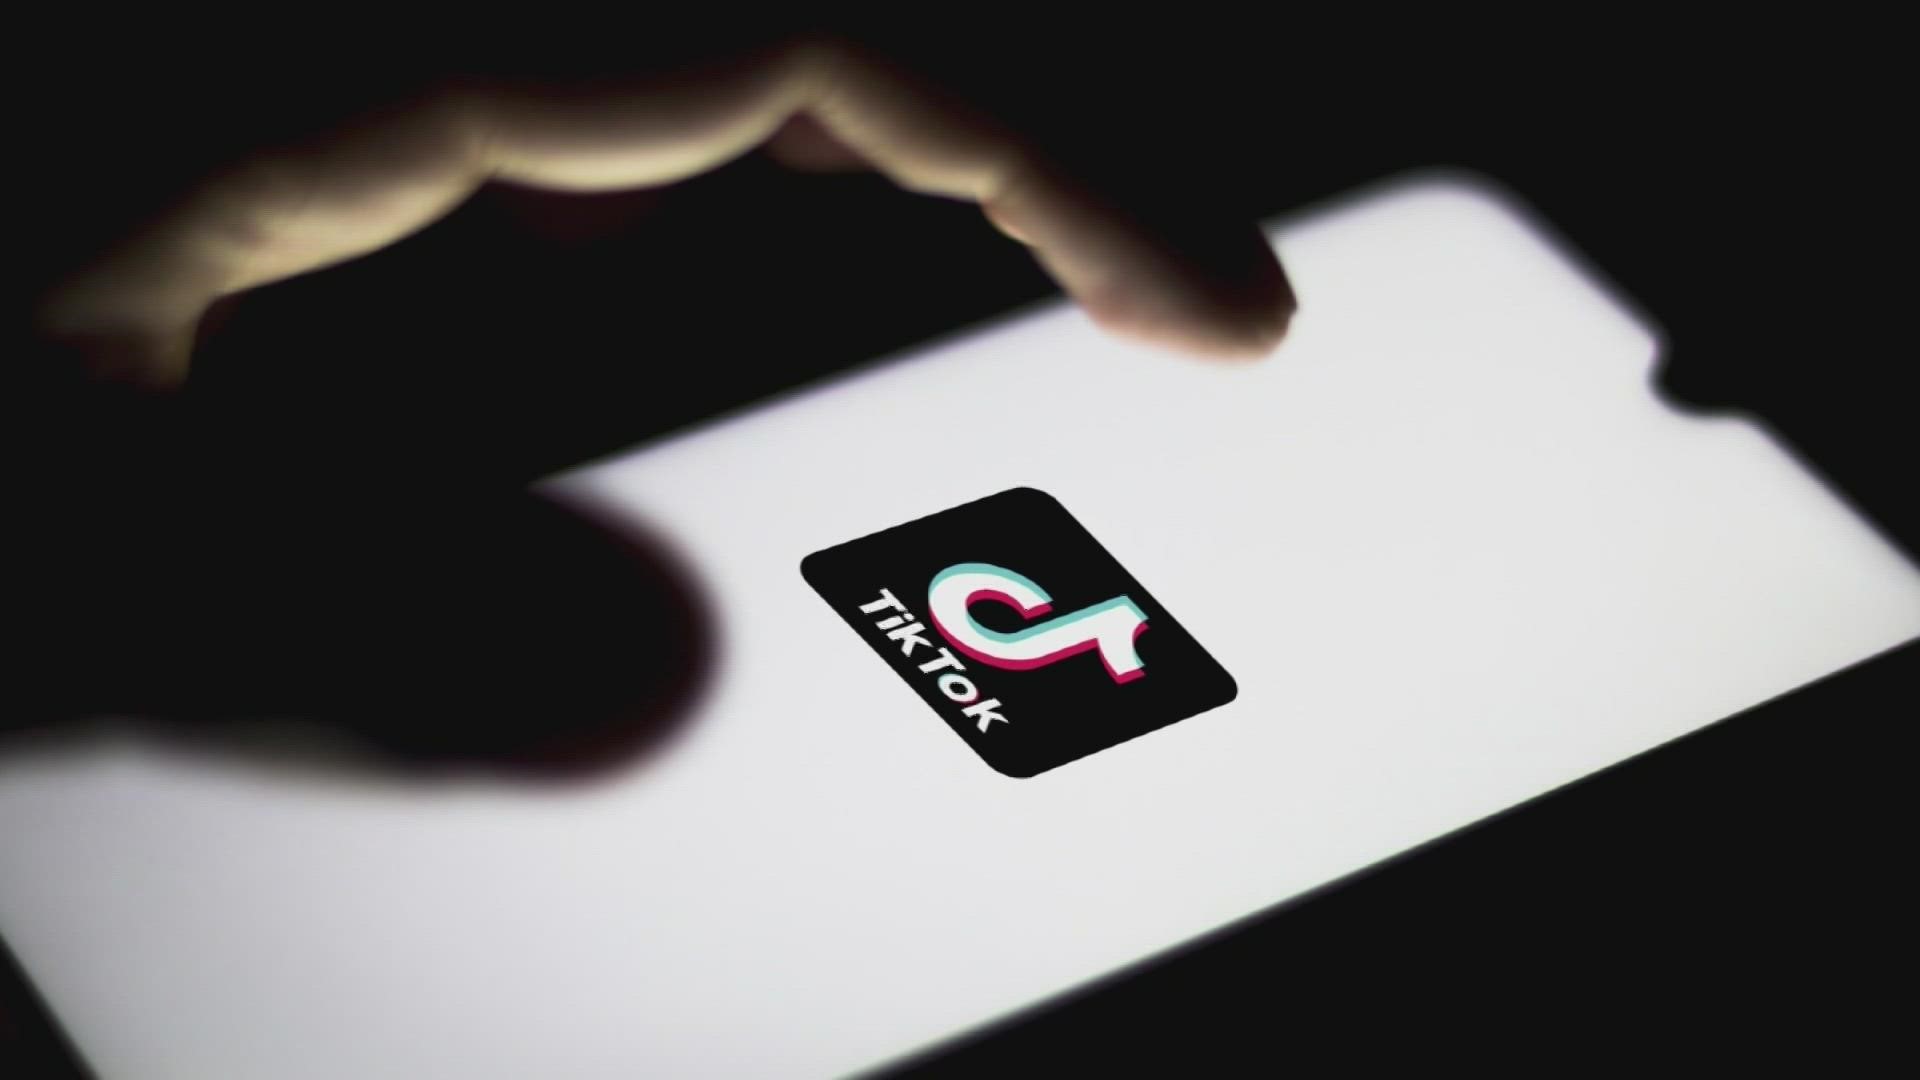 Some threats are reportedly in response to a TikTok challenge, in which students create a 'hoax threat' to say a school shooting will happen on Dec. 17.